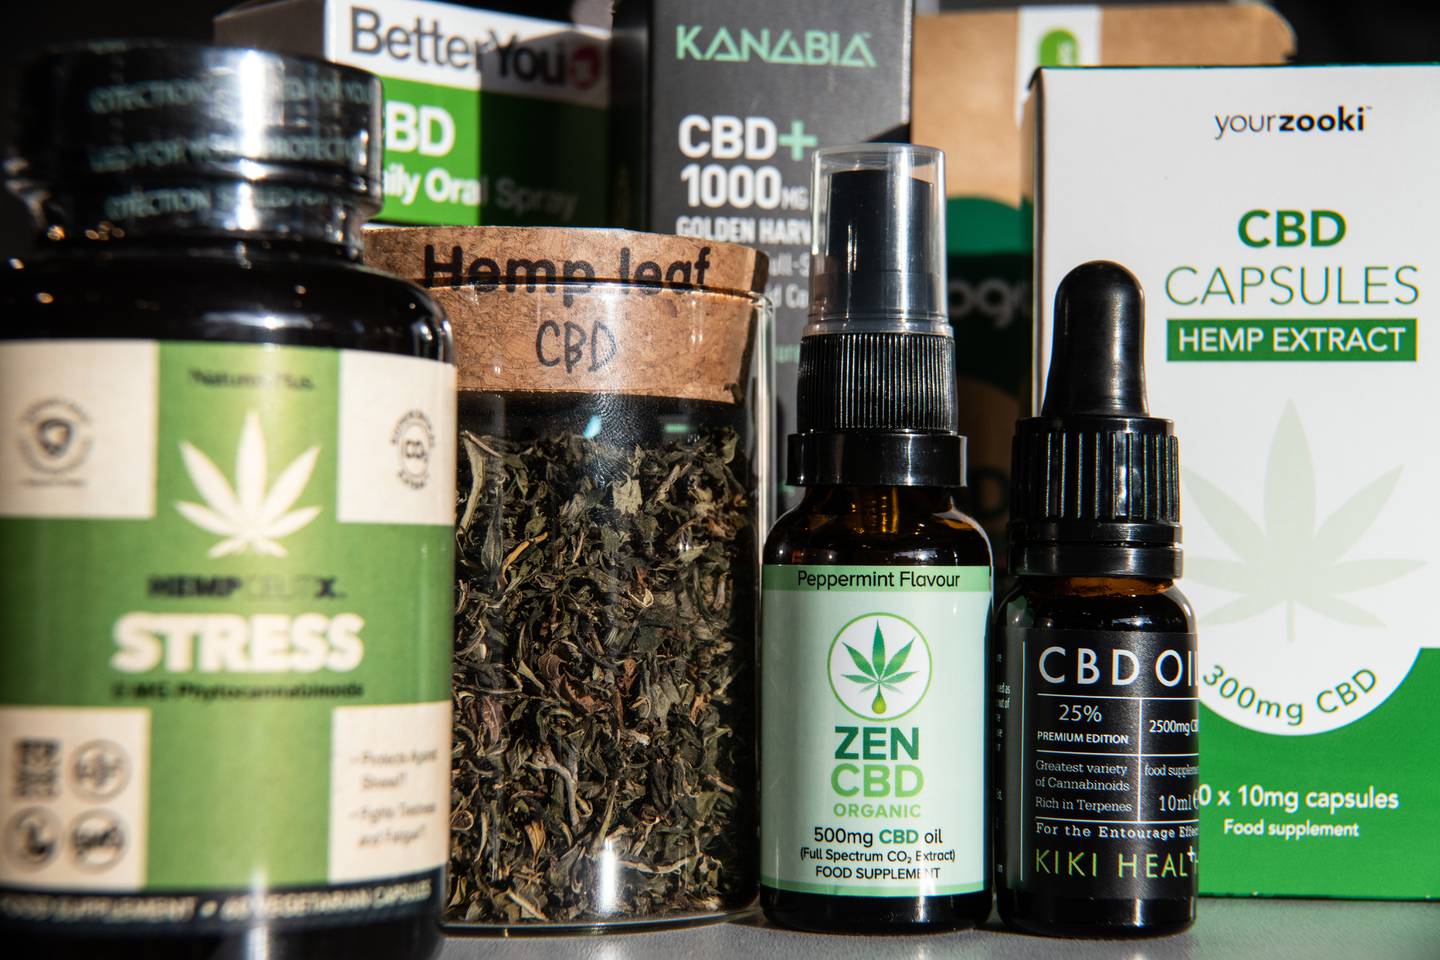 A collection of small jars and boxes that contain hemp and CBD.